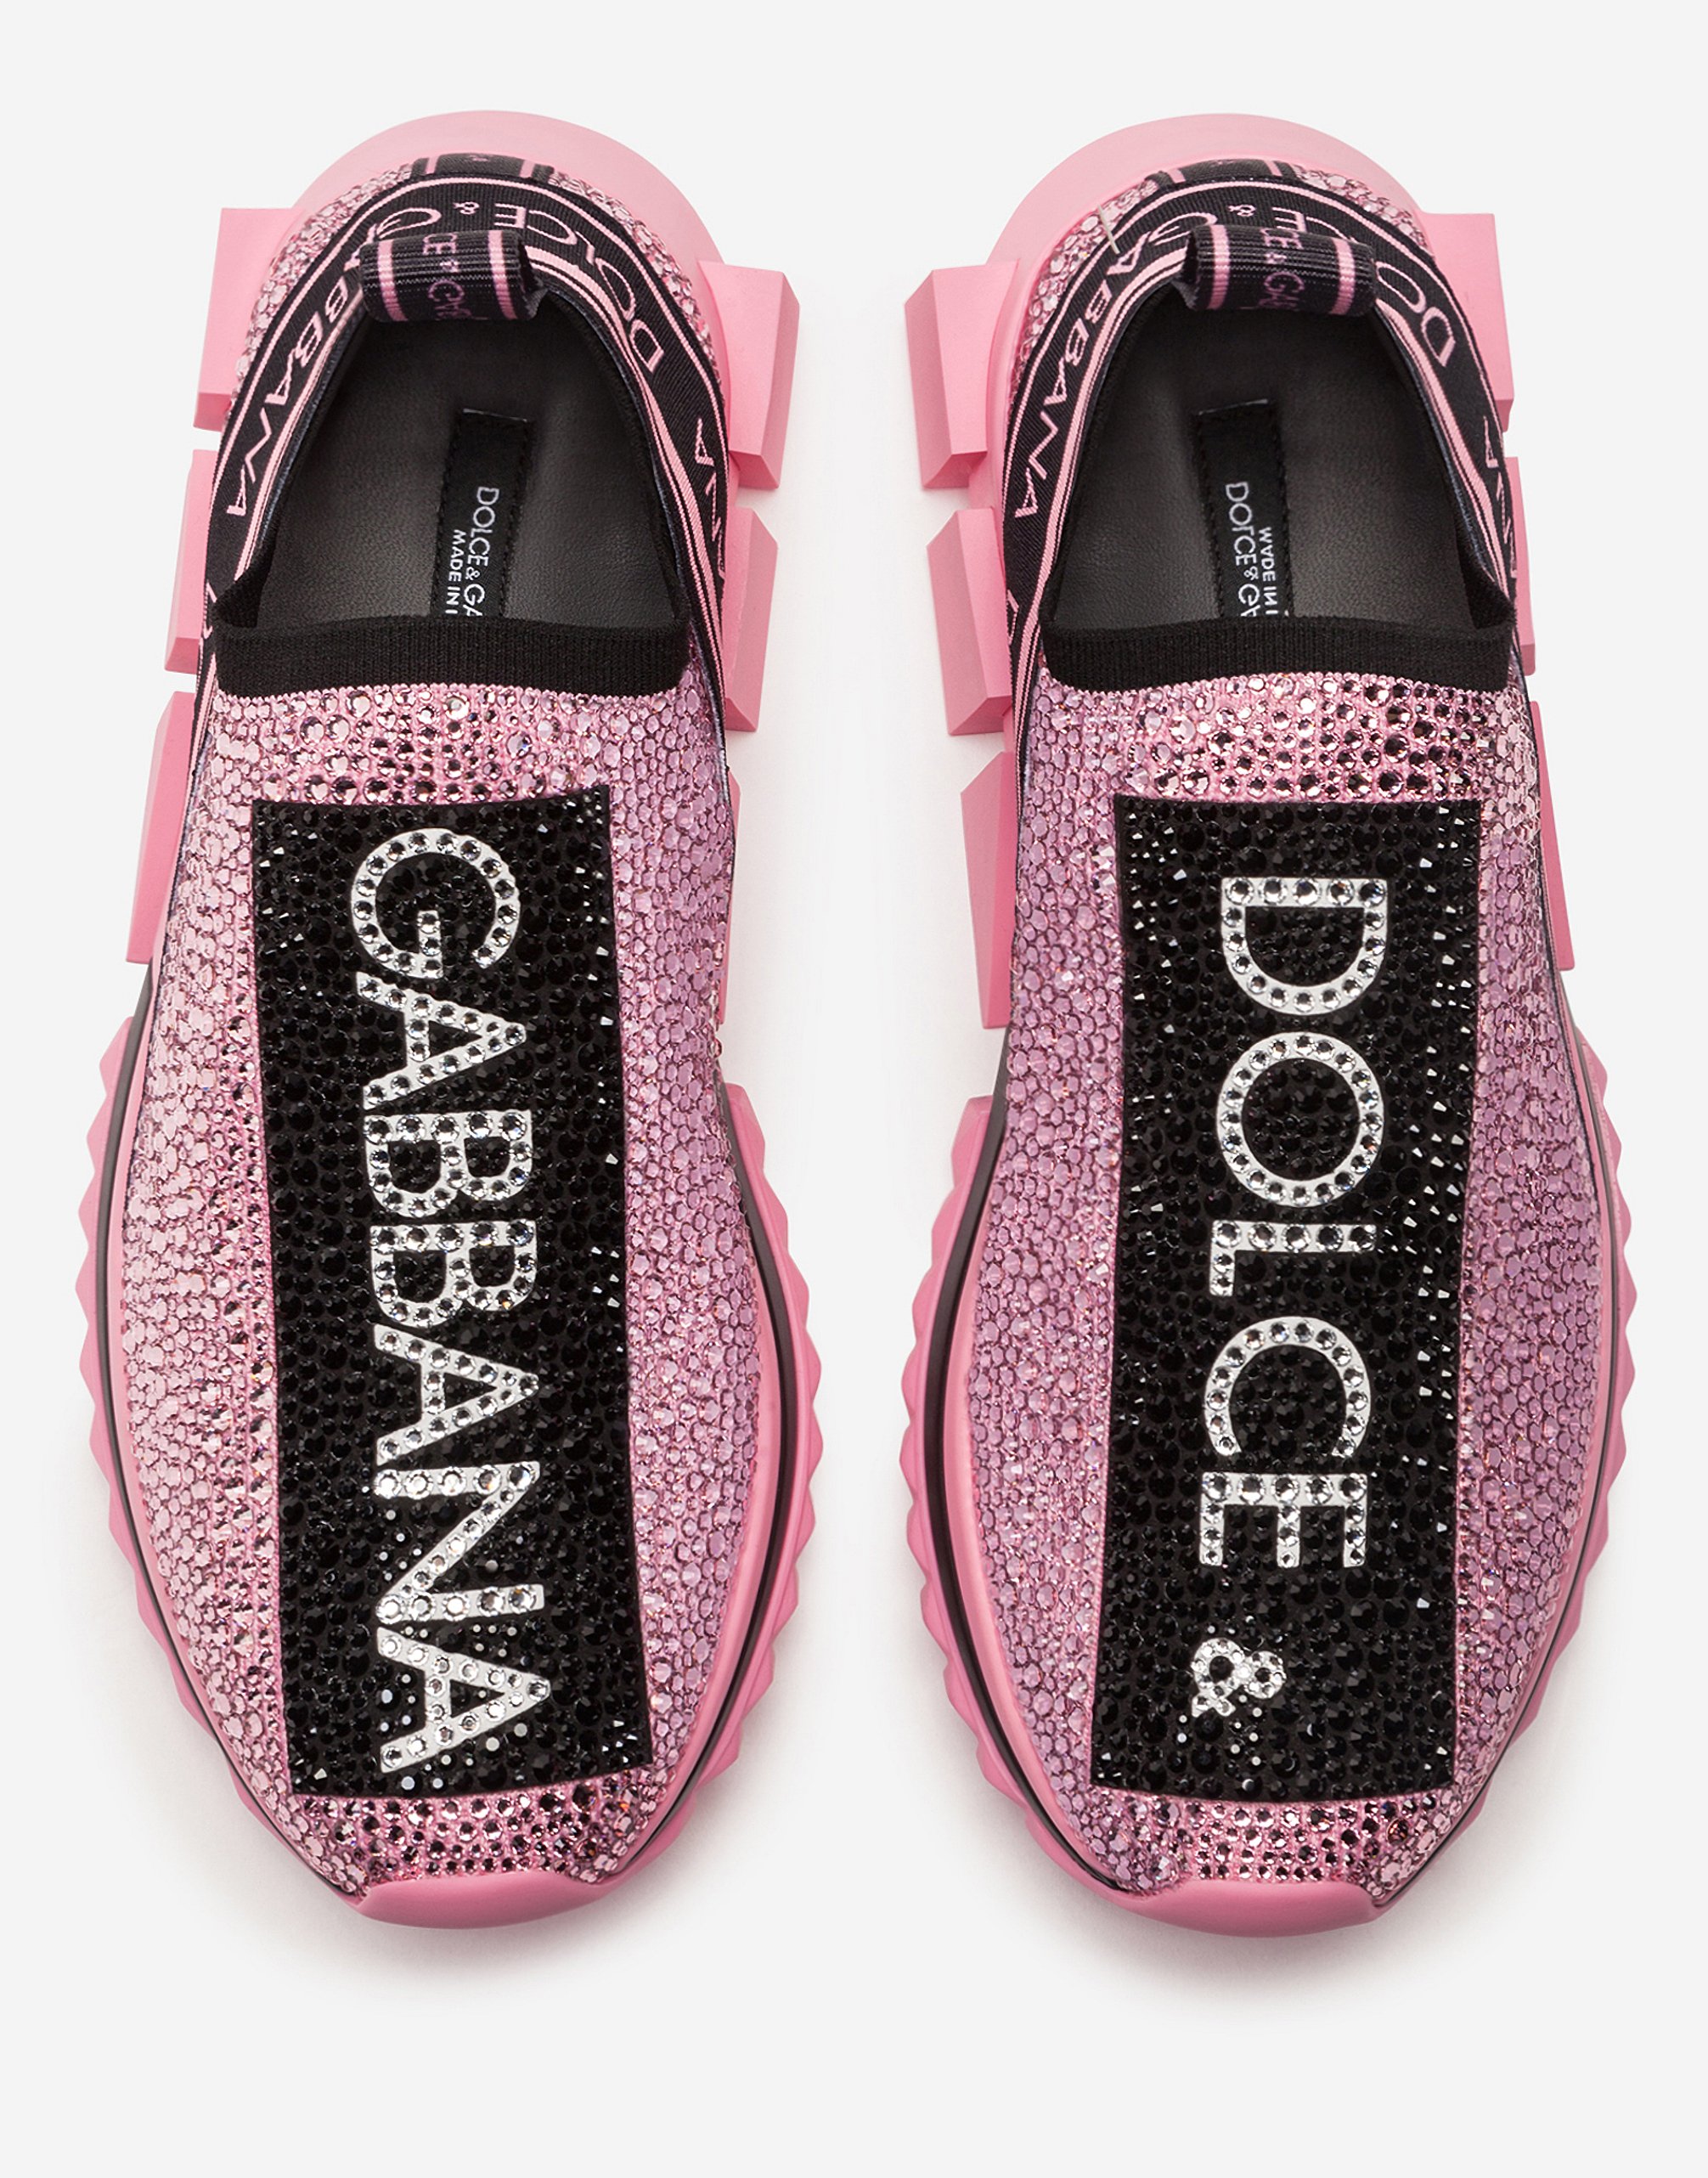 I eat breakfast Elevator comprehensive Sorrento sneakers with fusible crystals in Pink for Women | Dolce&Gabbana®